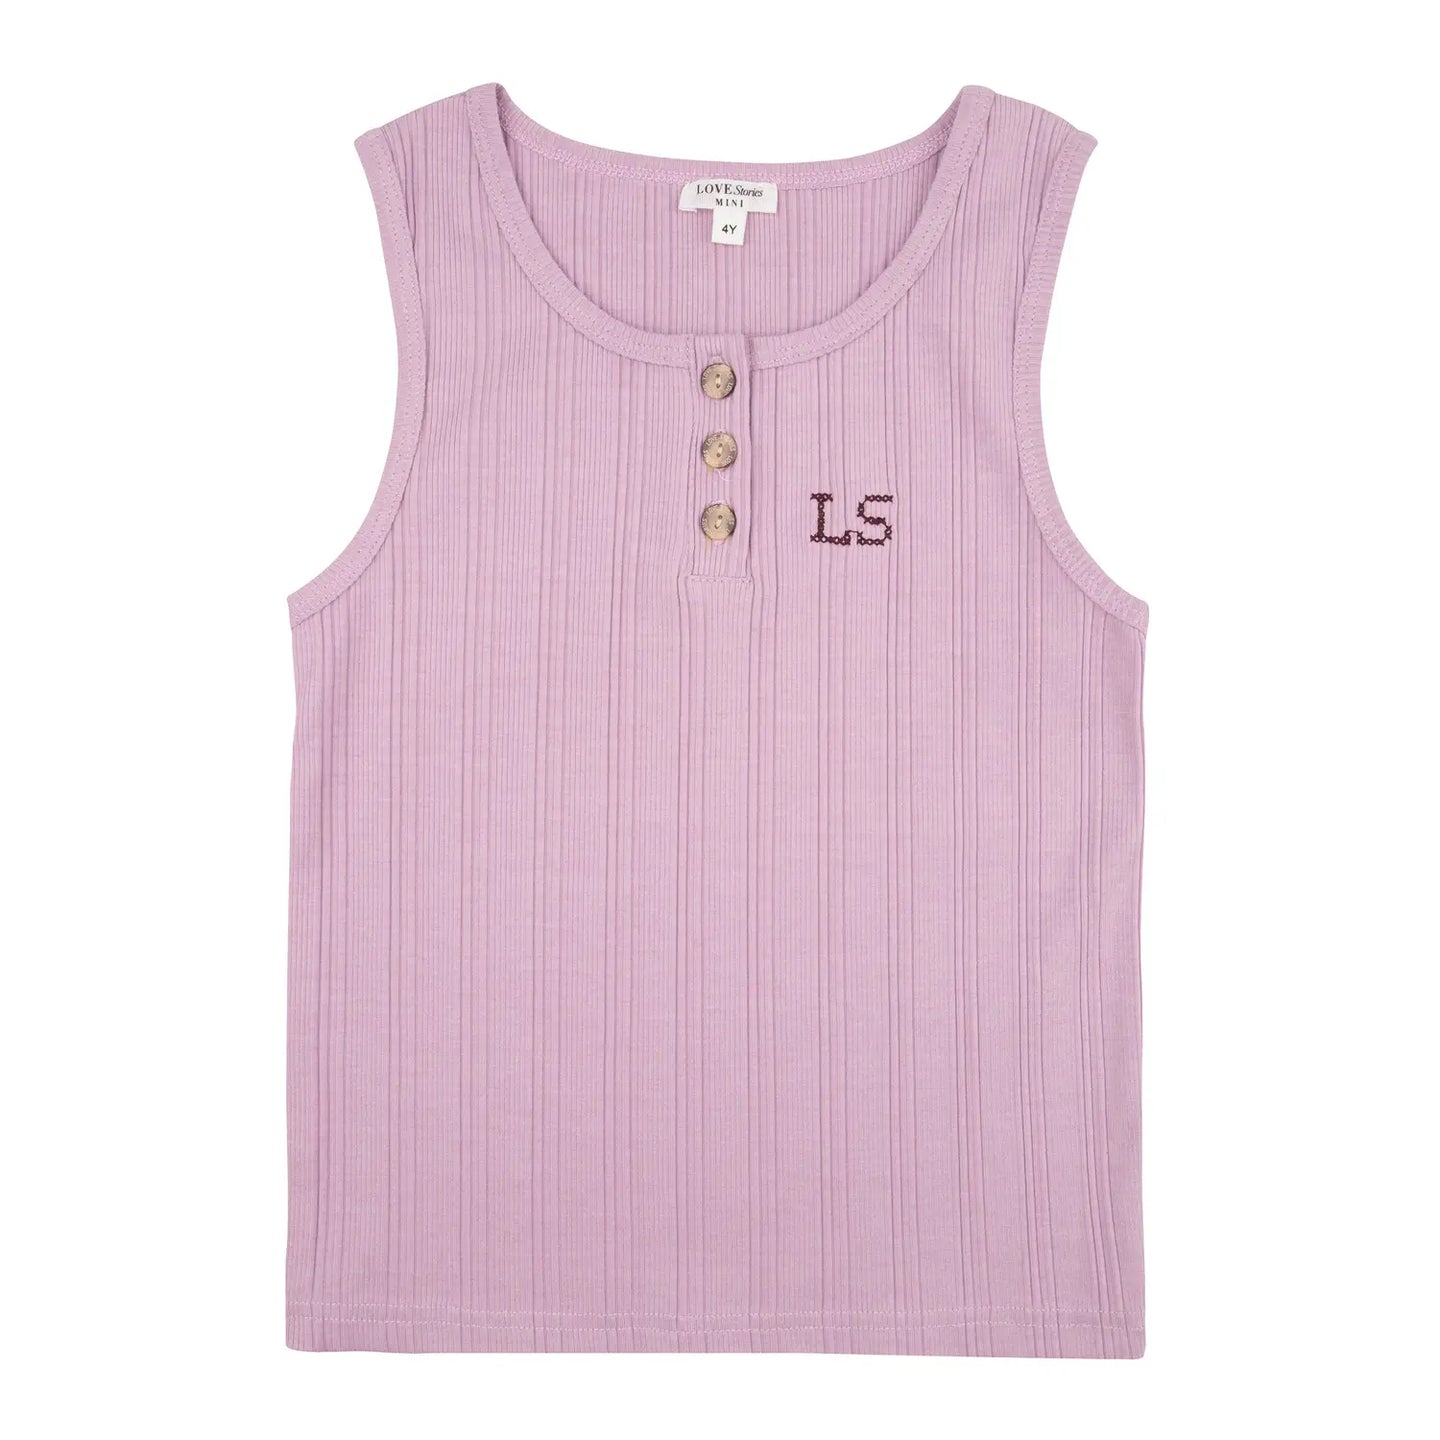 Jill Children’s tank top in mauve pink from Love stories